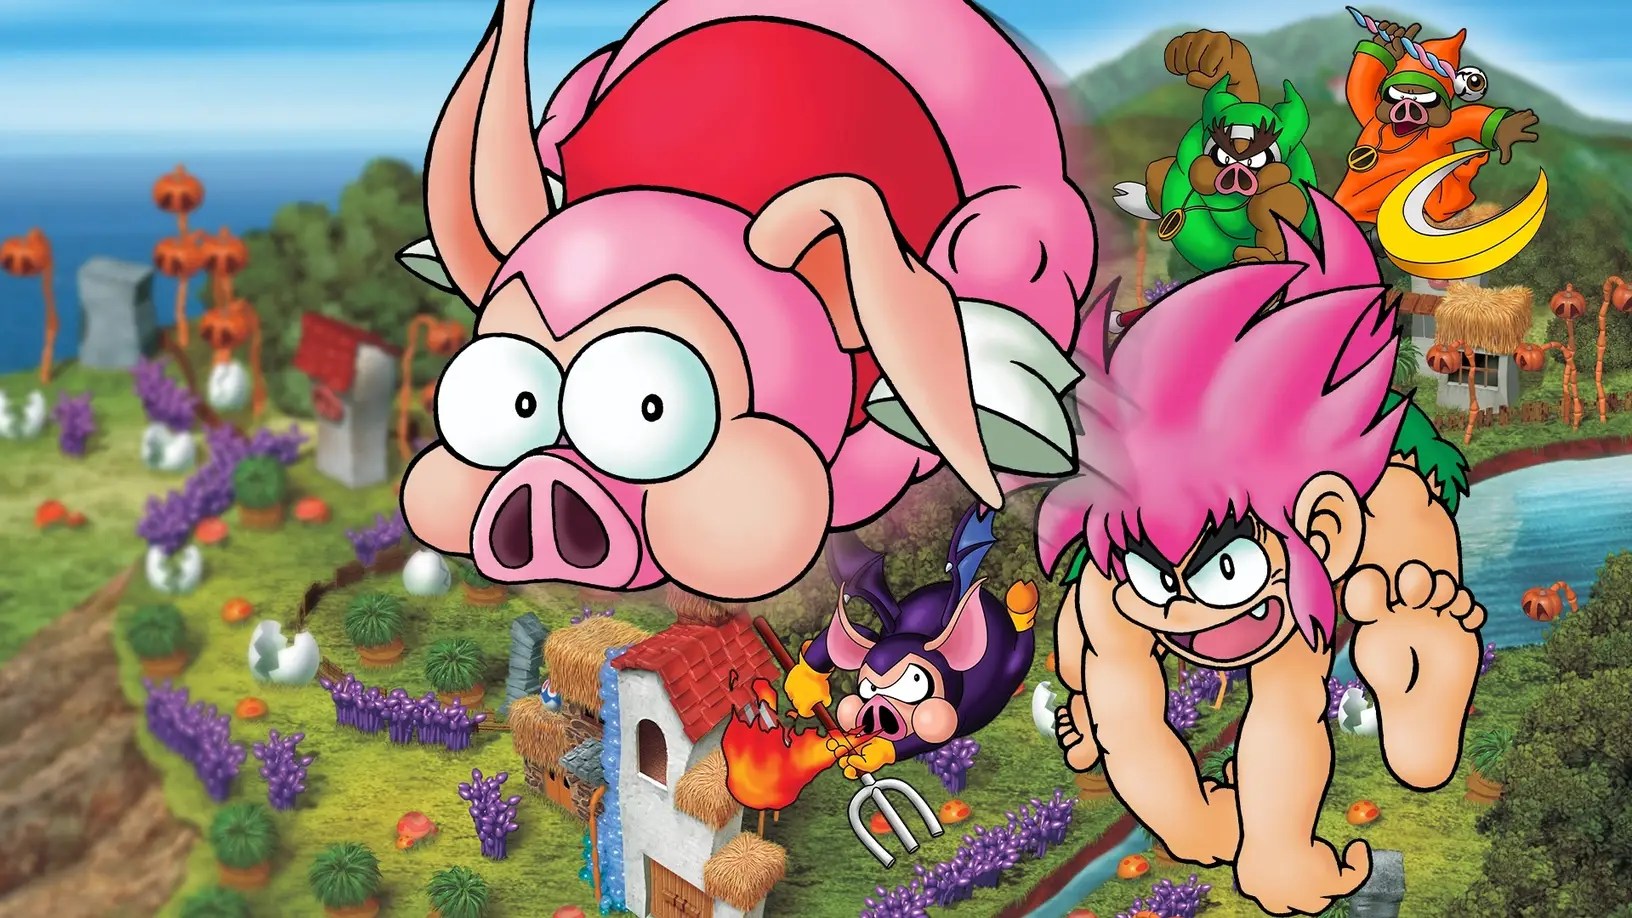 Tomba throwing a pig